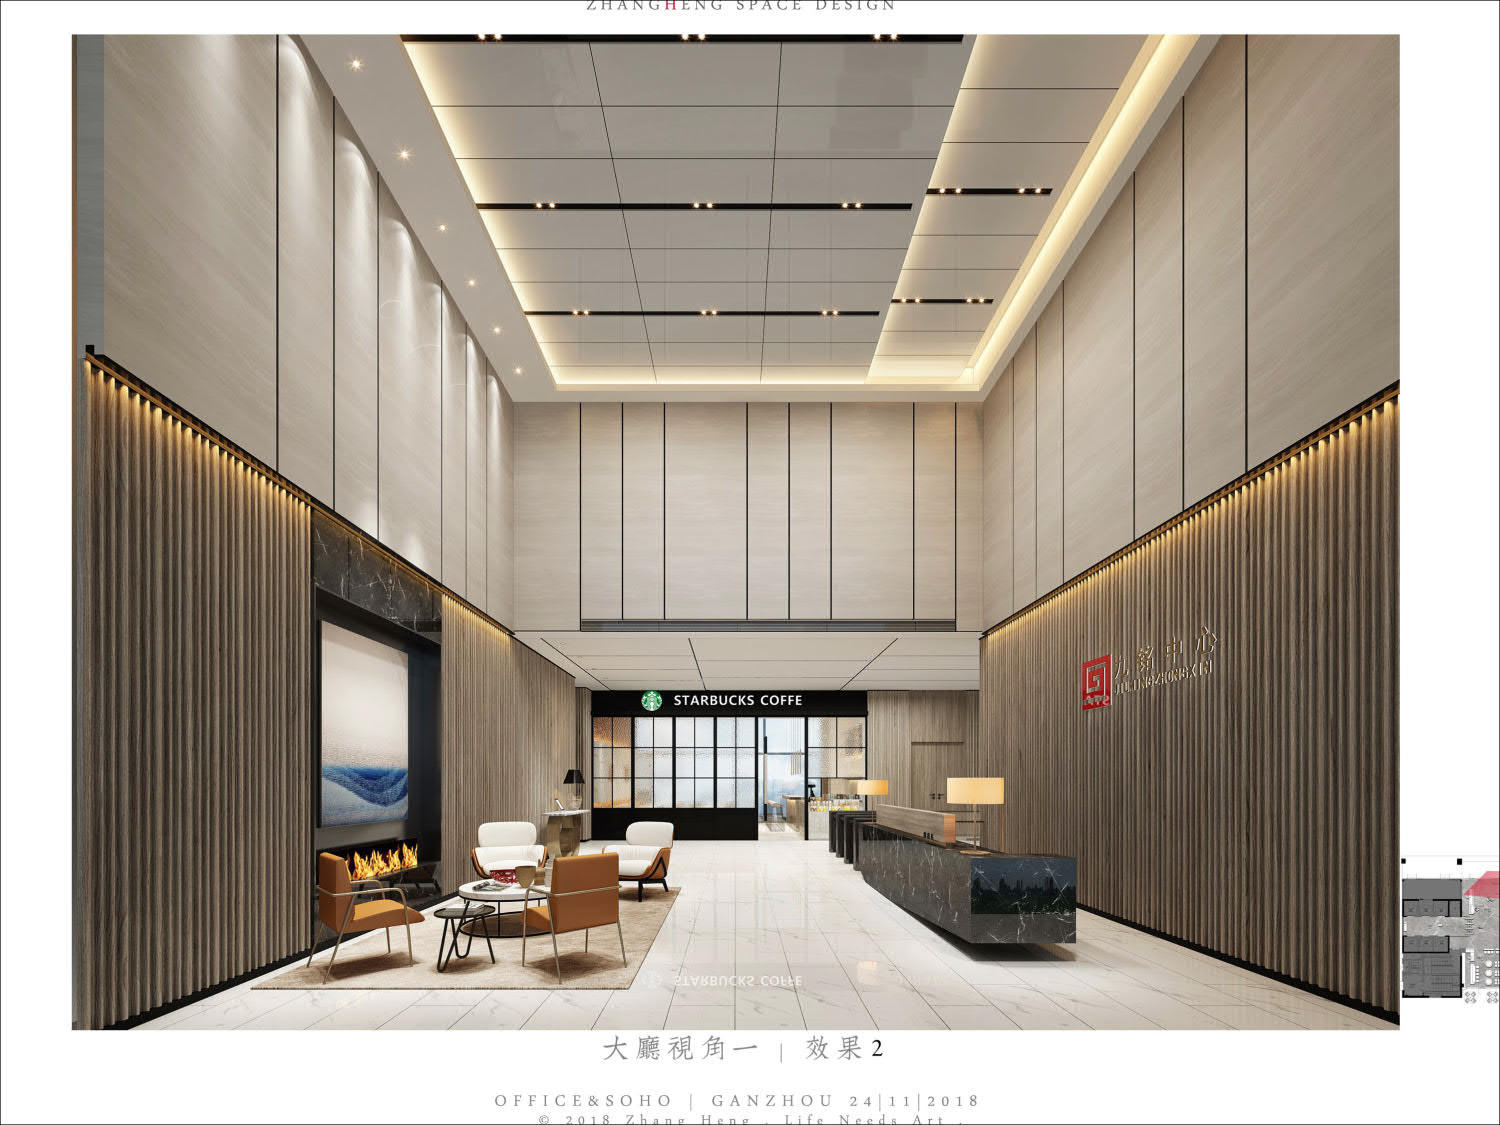 Jiuming Center 3# and 4# public area renderings report plan